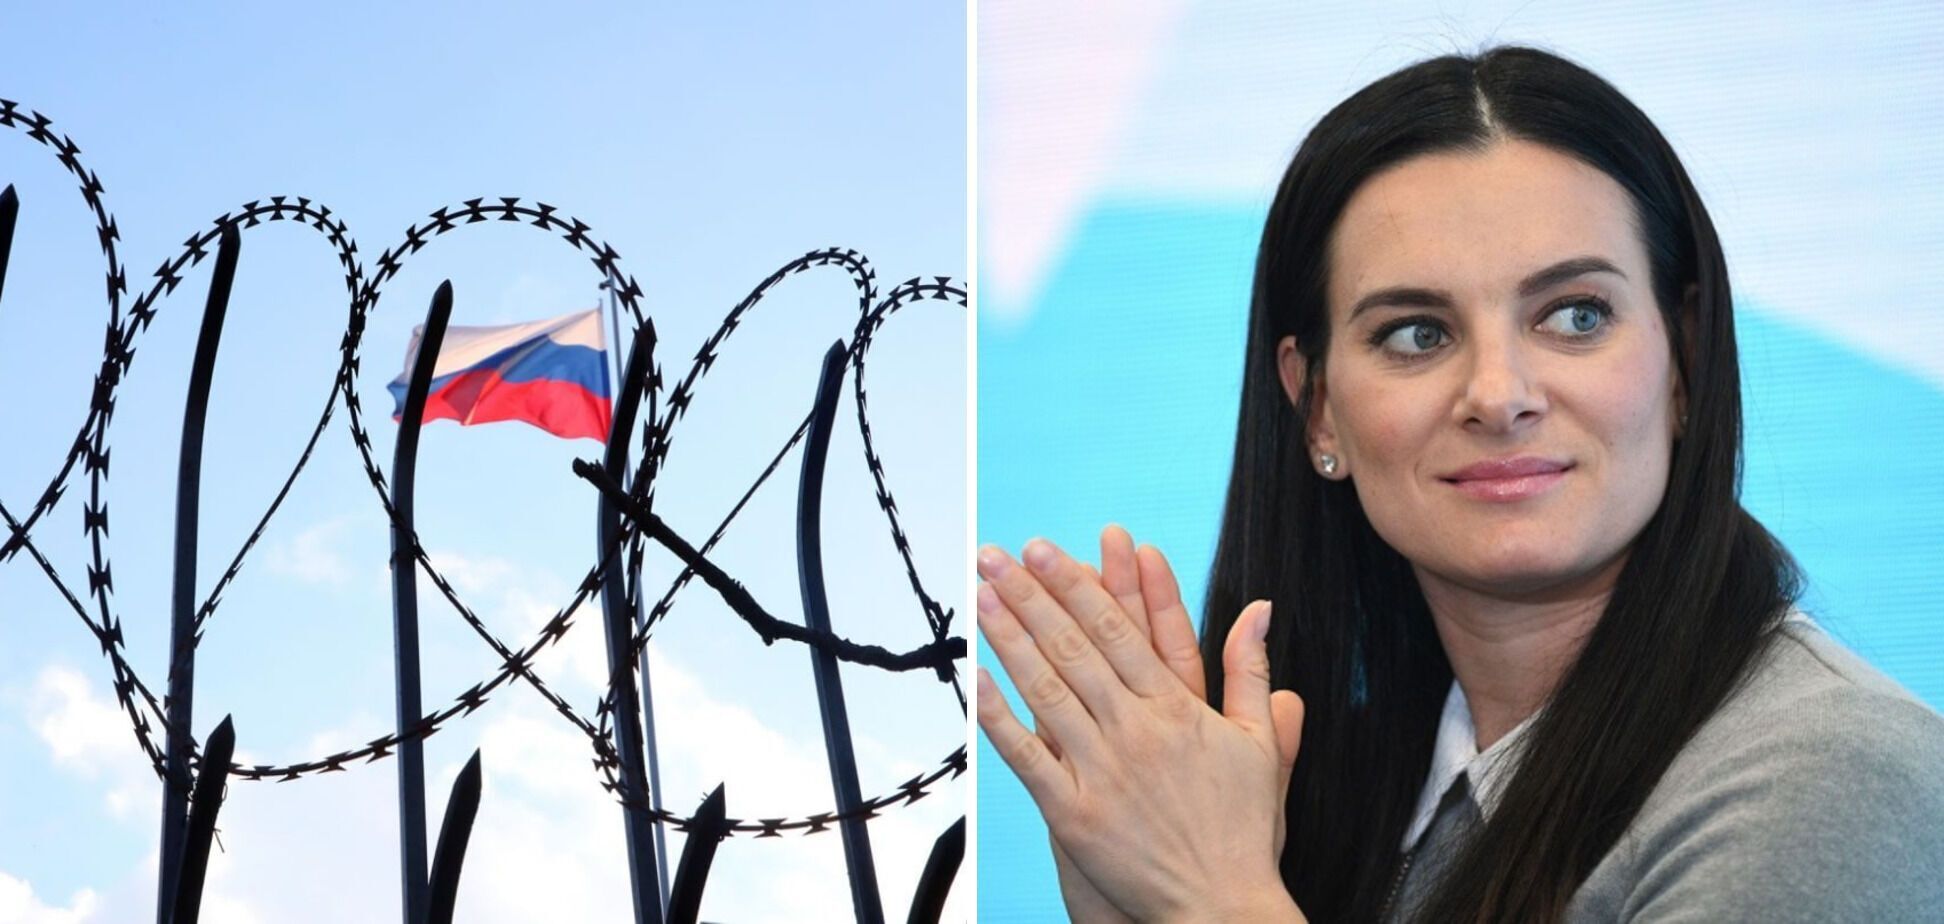 ''She behaved disgustingly''. In the State Duma threw a tantrum over Isinbayeva's behavior